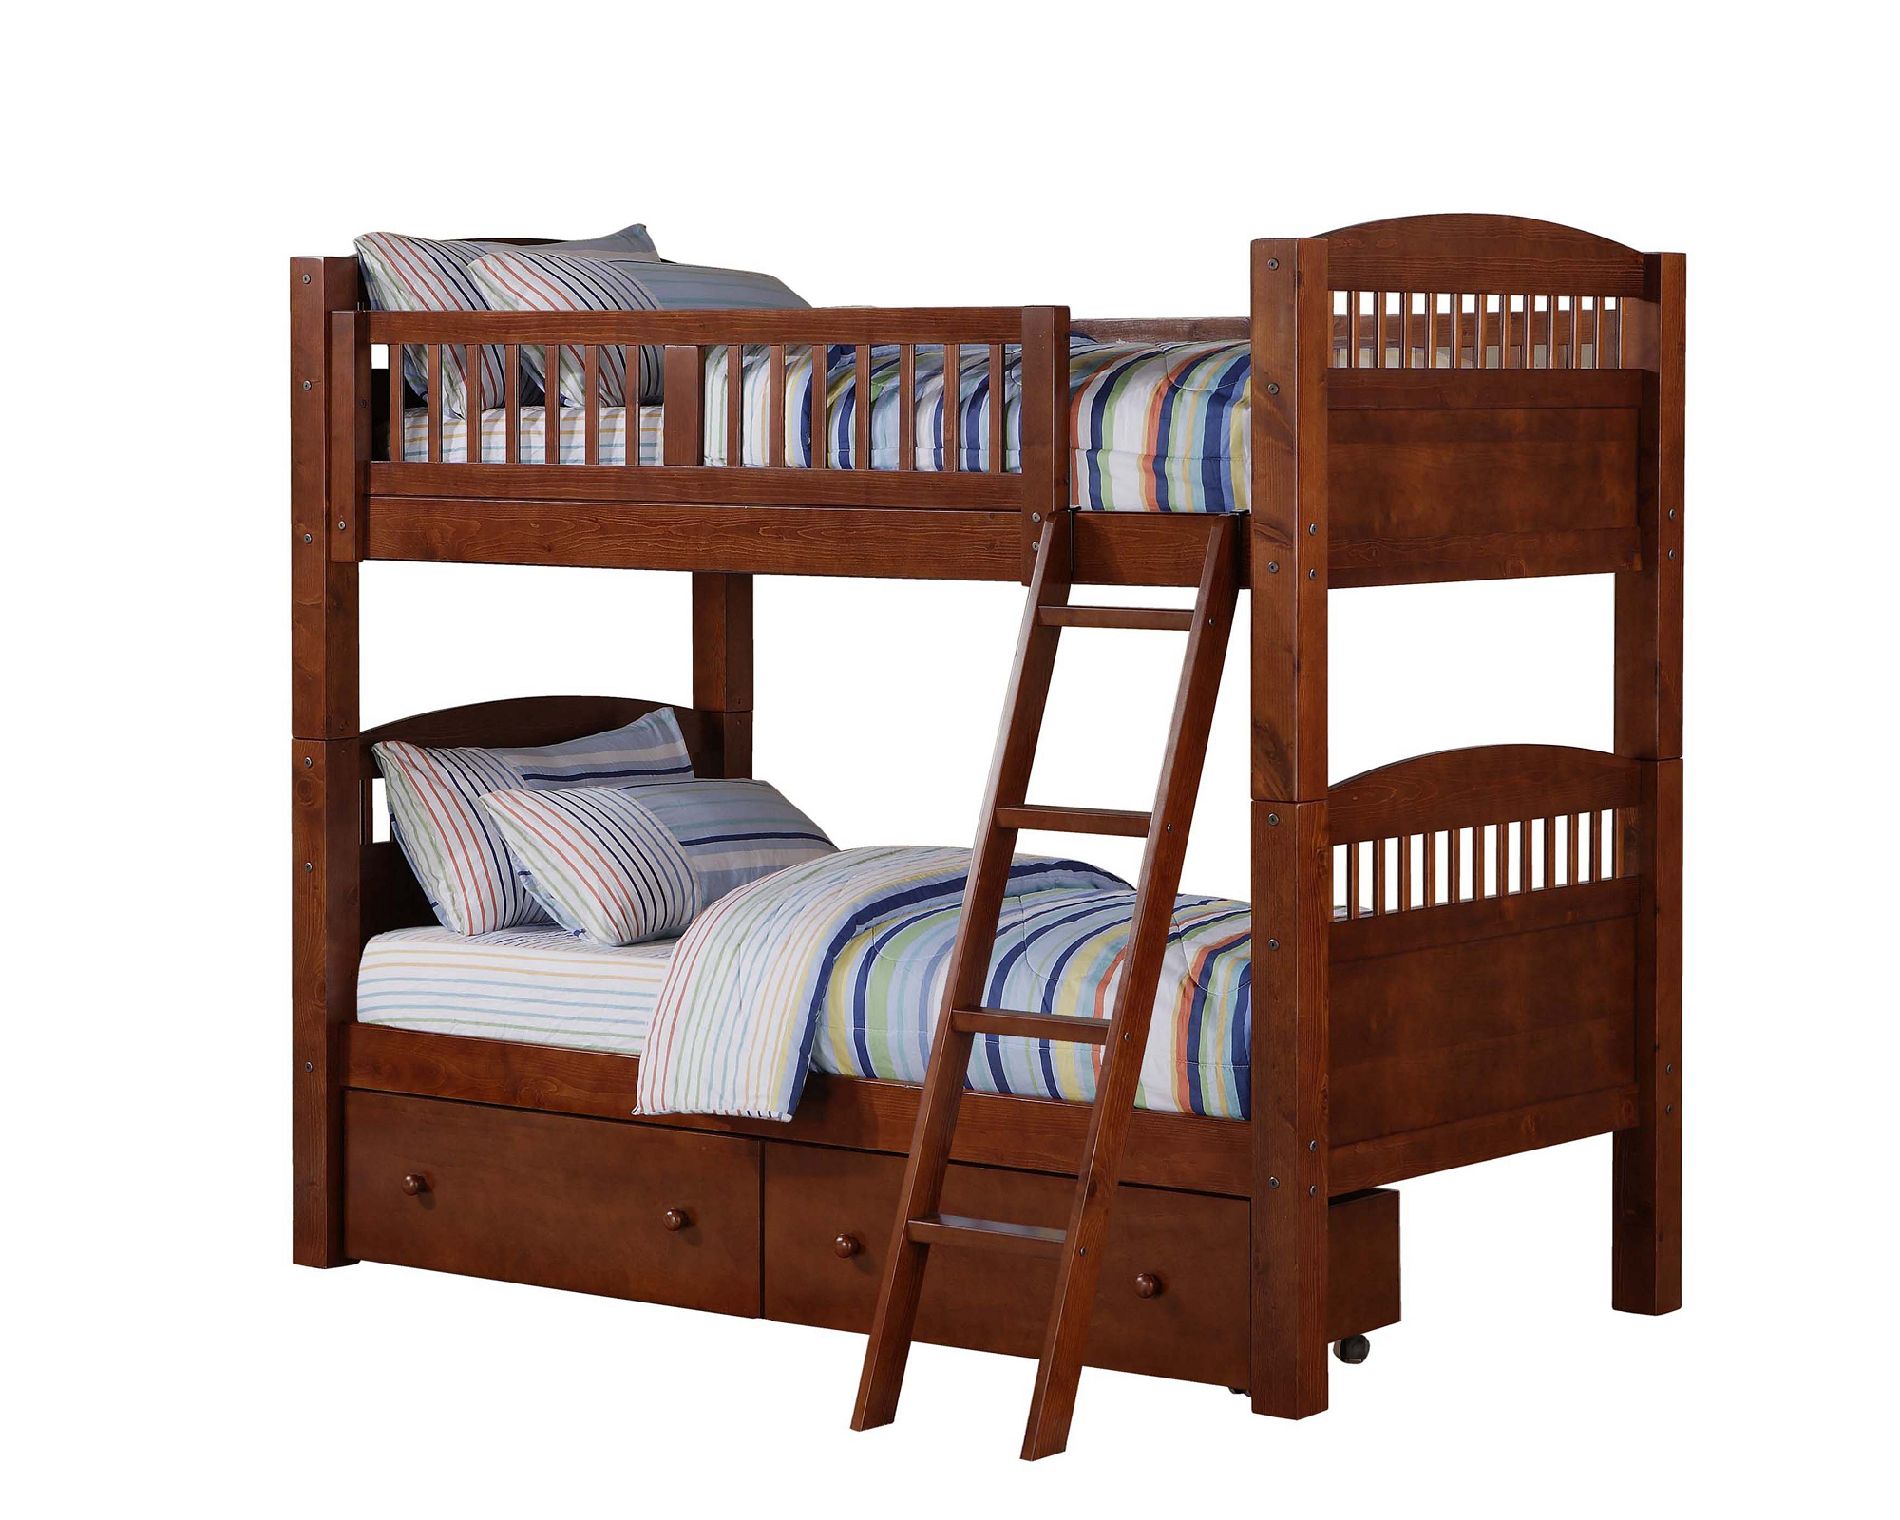 bunk bed outlet